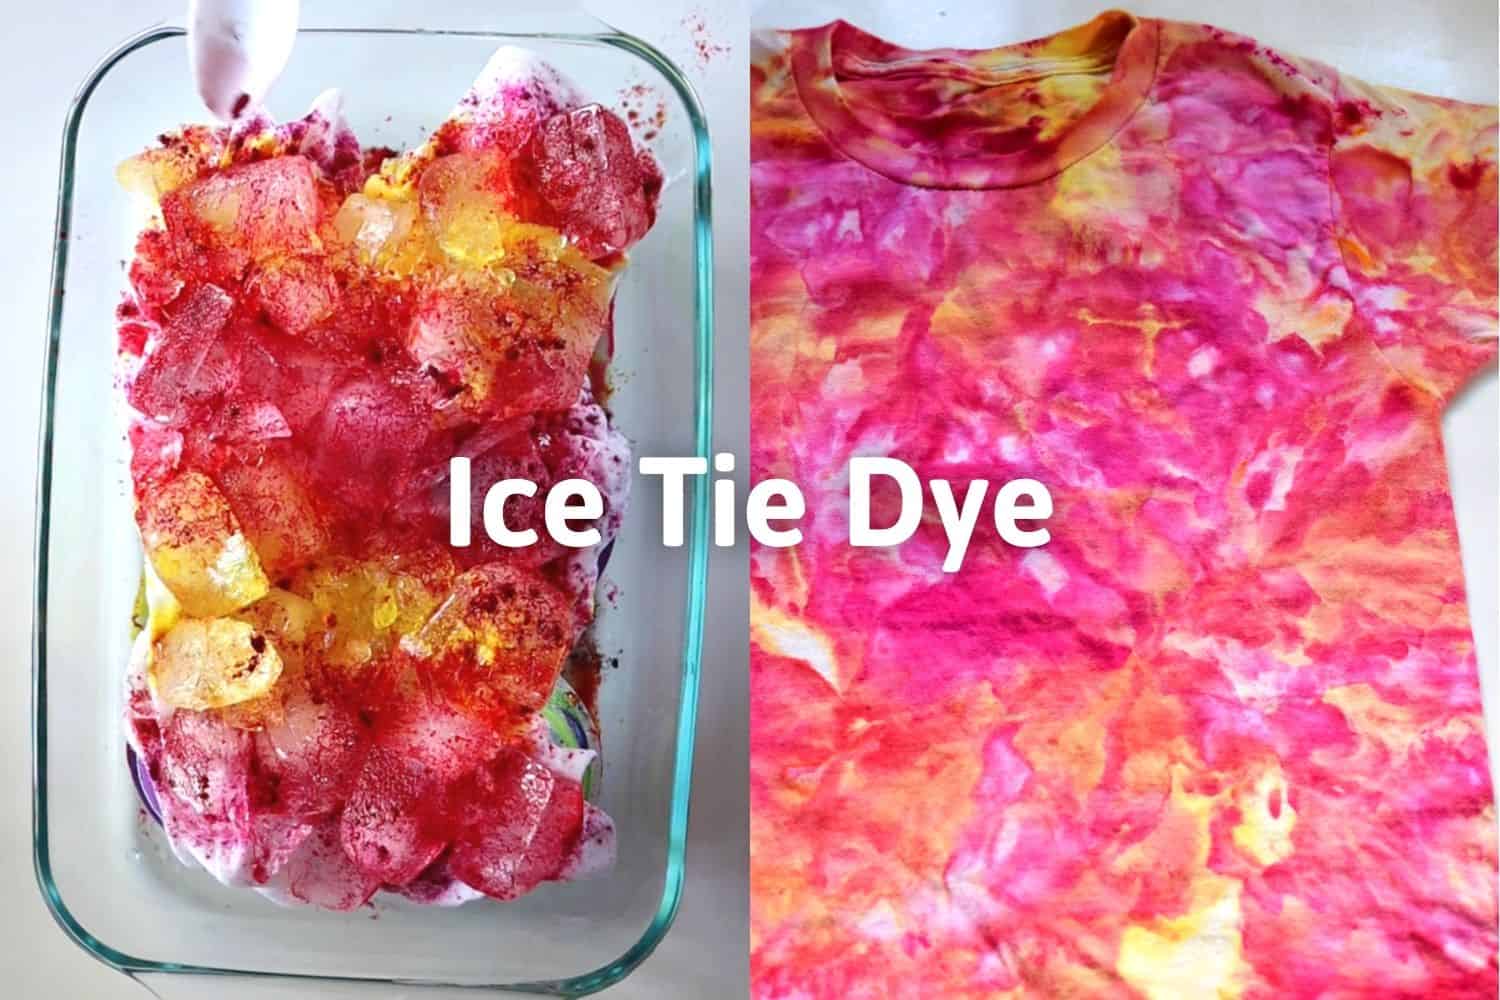 How to use soda ash for tie dye